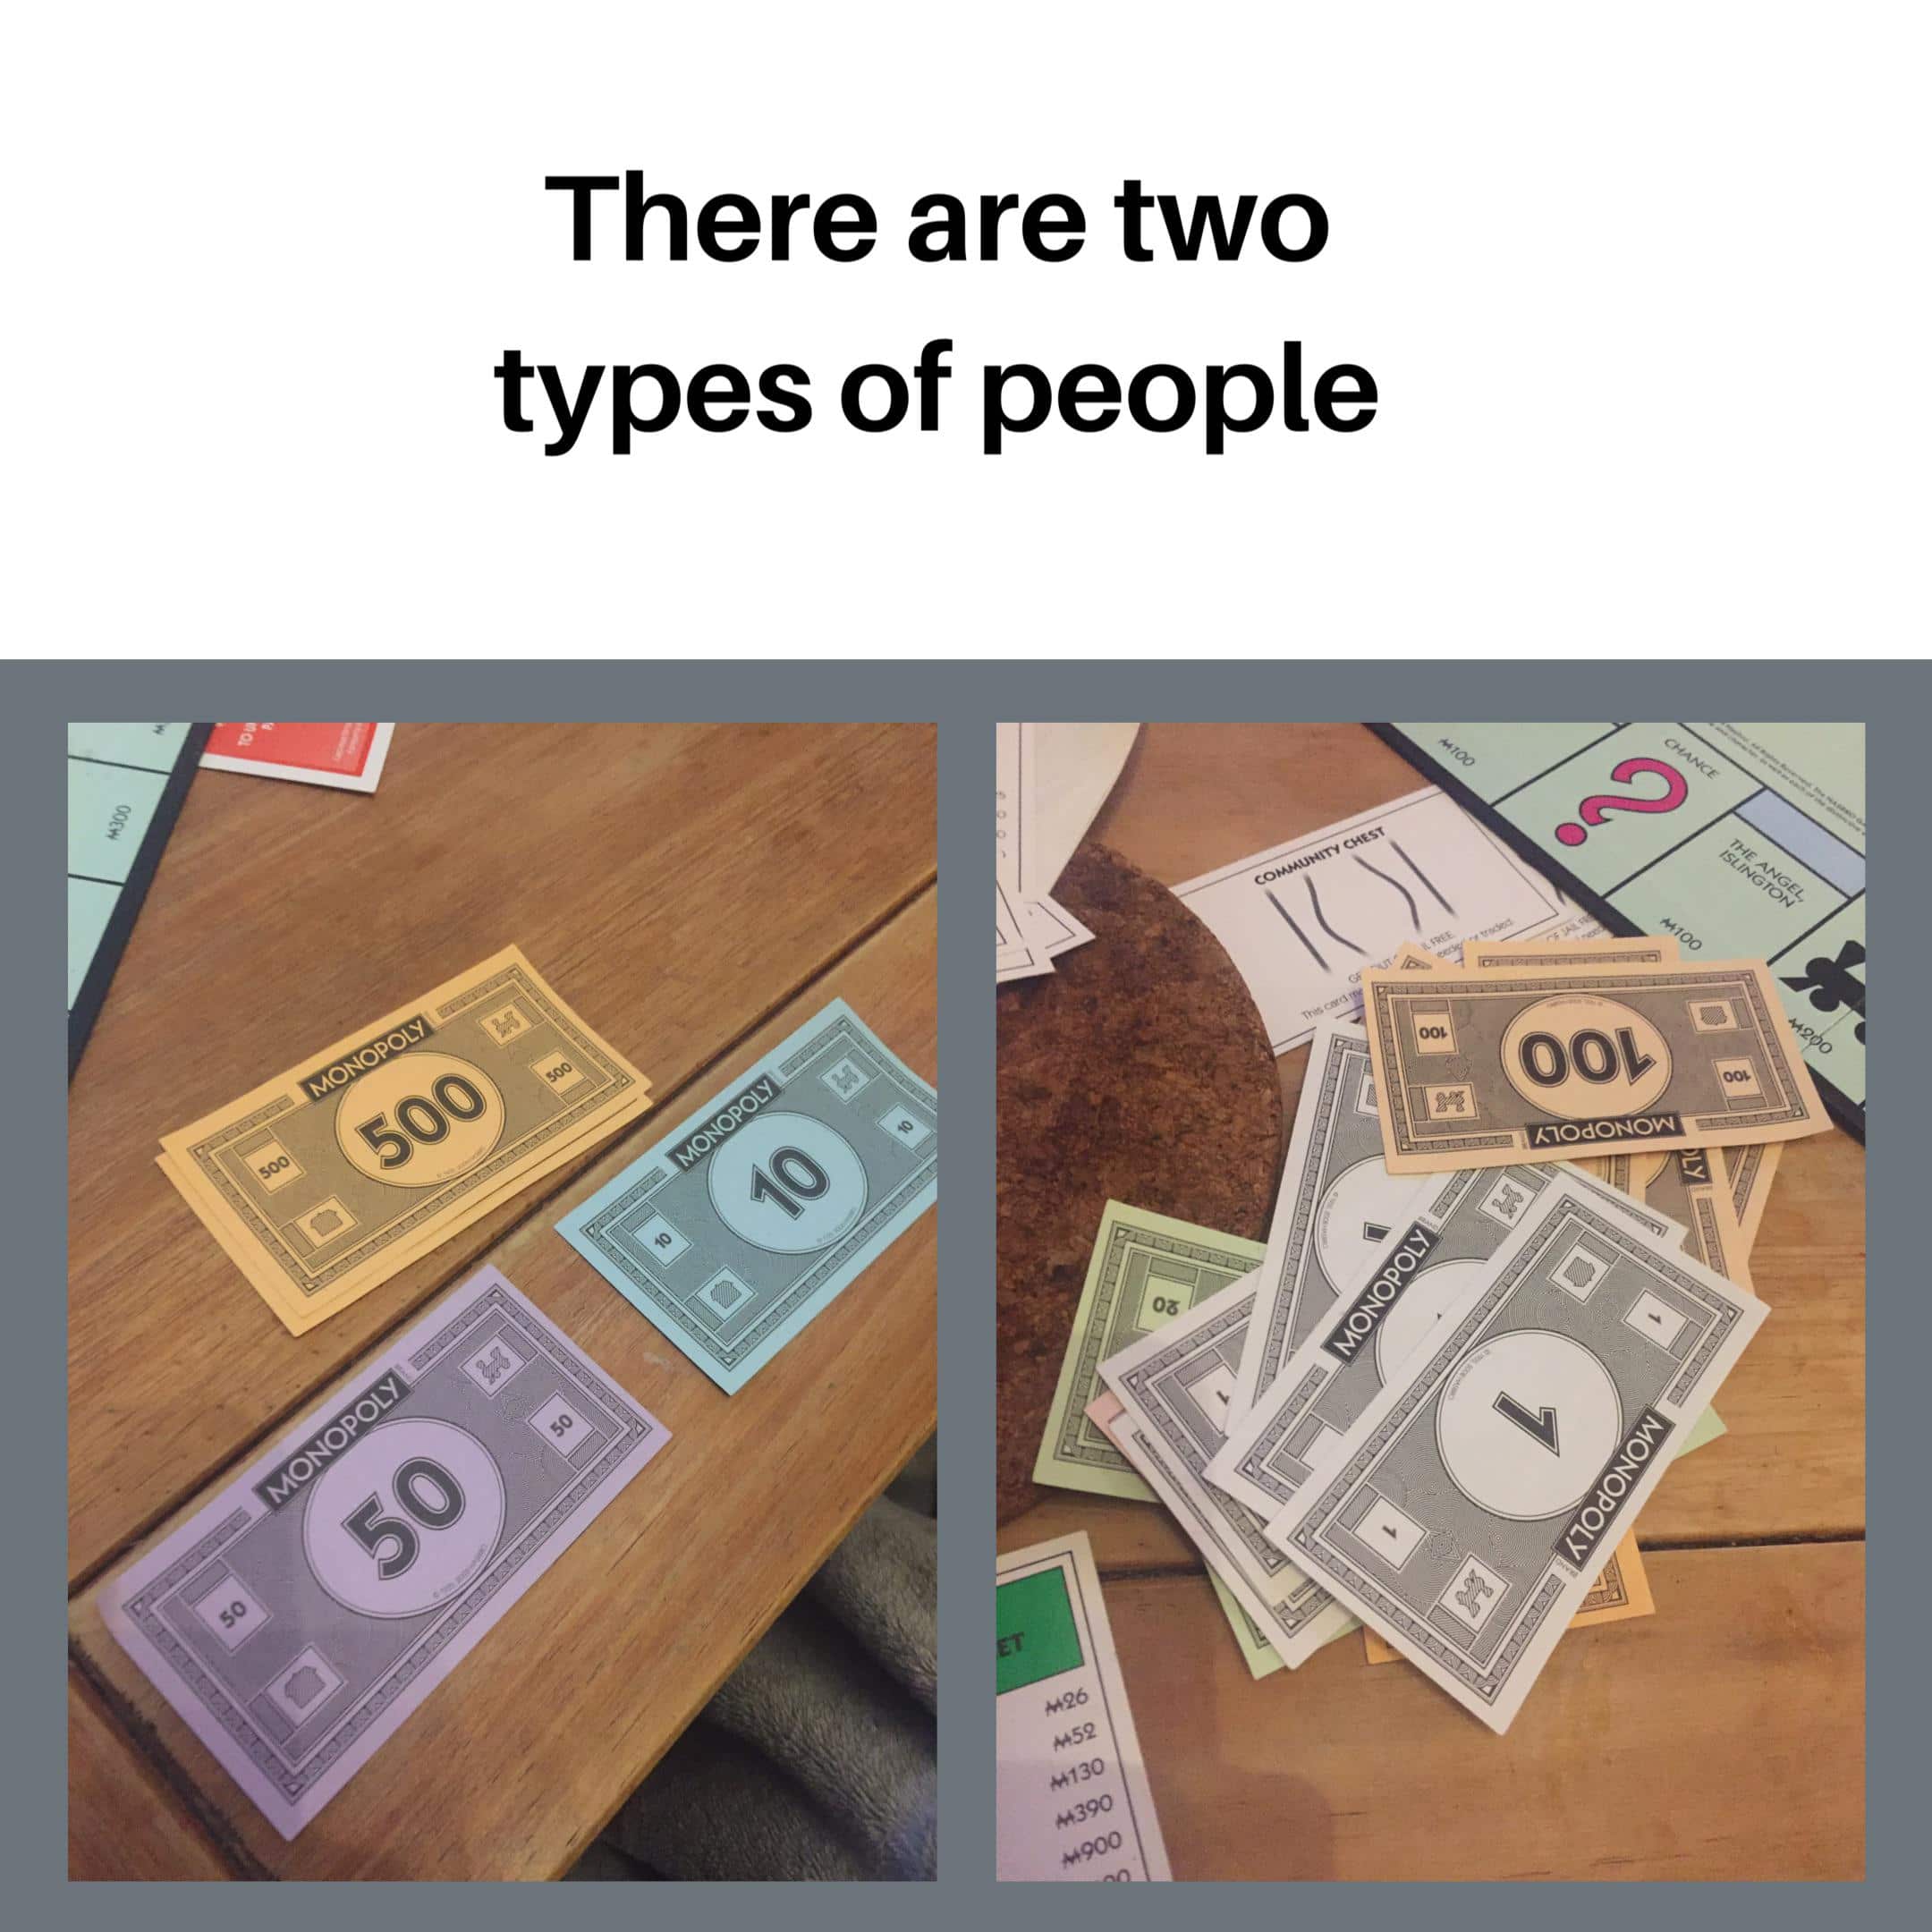 Funny, Monopoly, WgXcQ, Qw4, Mandela, Reality other memes Funny, Monopoly, WgXcQ, Qw4, Mandela, Reality text: There are two types of people no dONOVA 